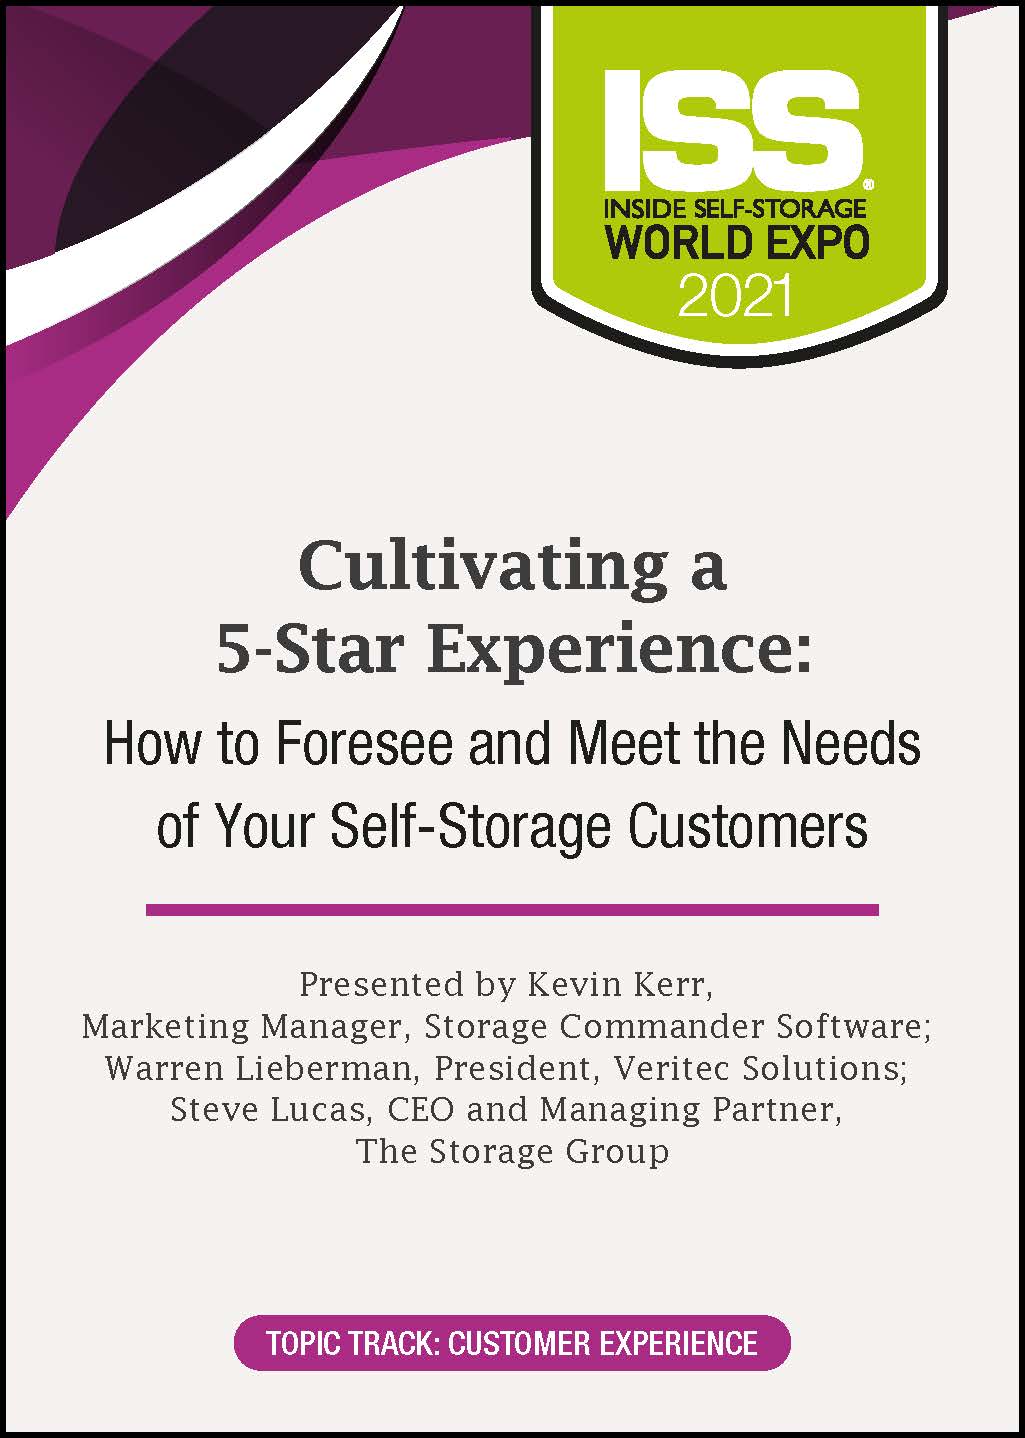 DVD - Cultivating a 5-Star Experience: How to Foresee and Meet the Needs of Your Self-Storage Customers